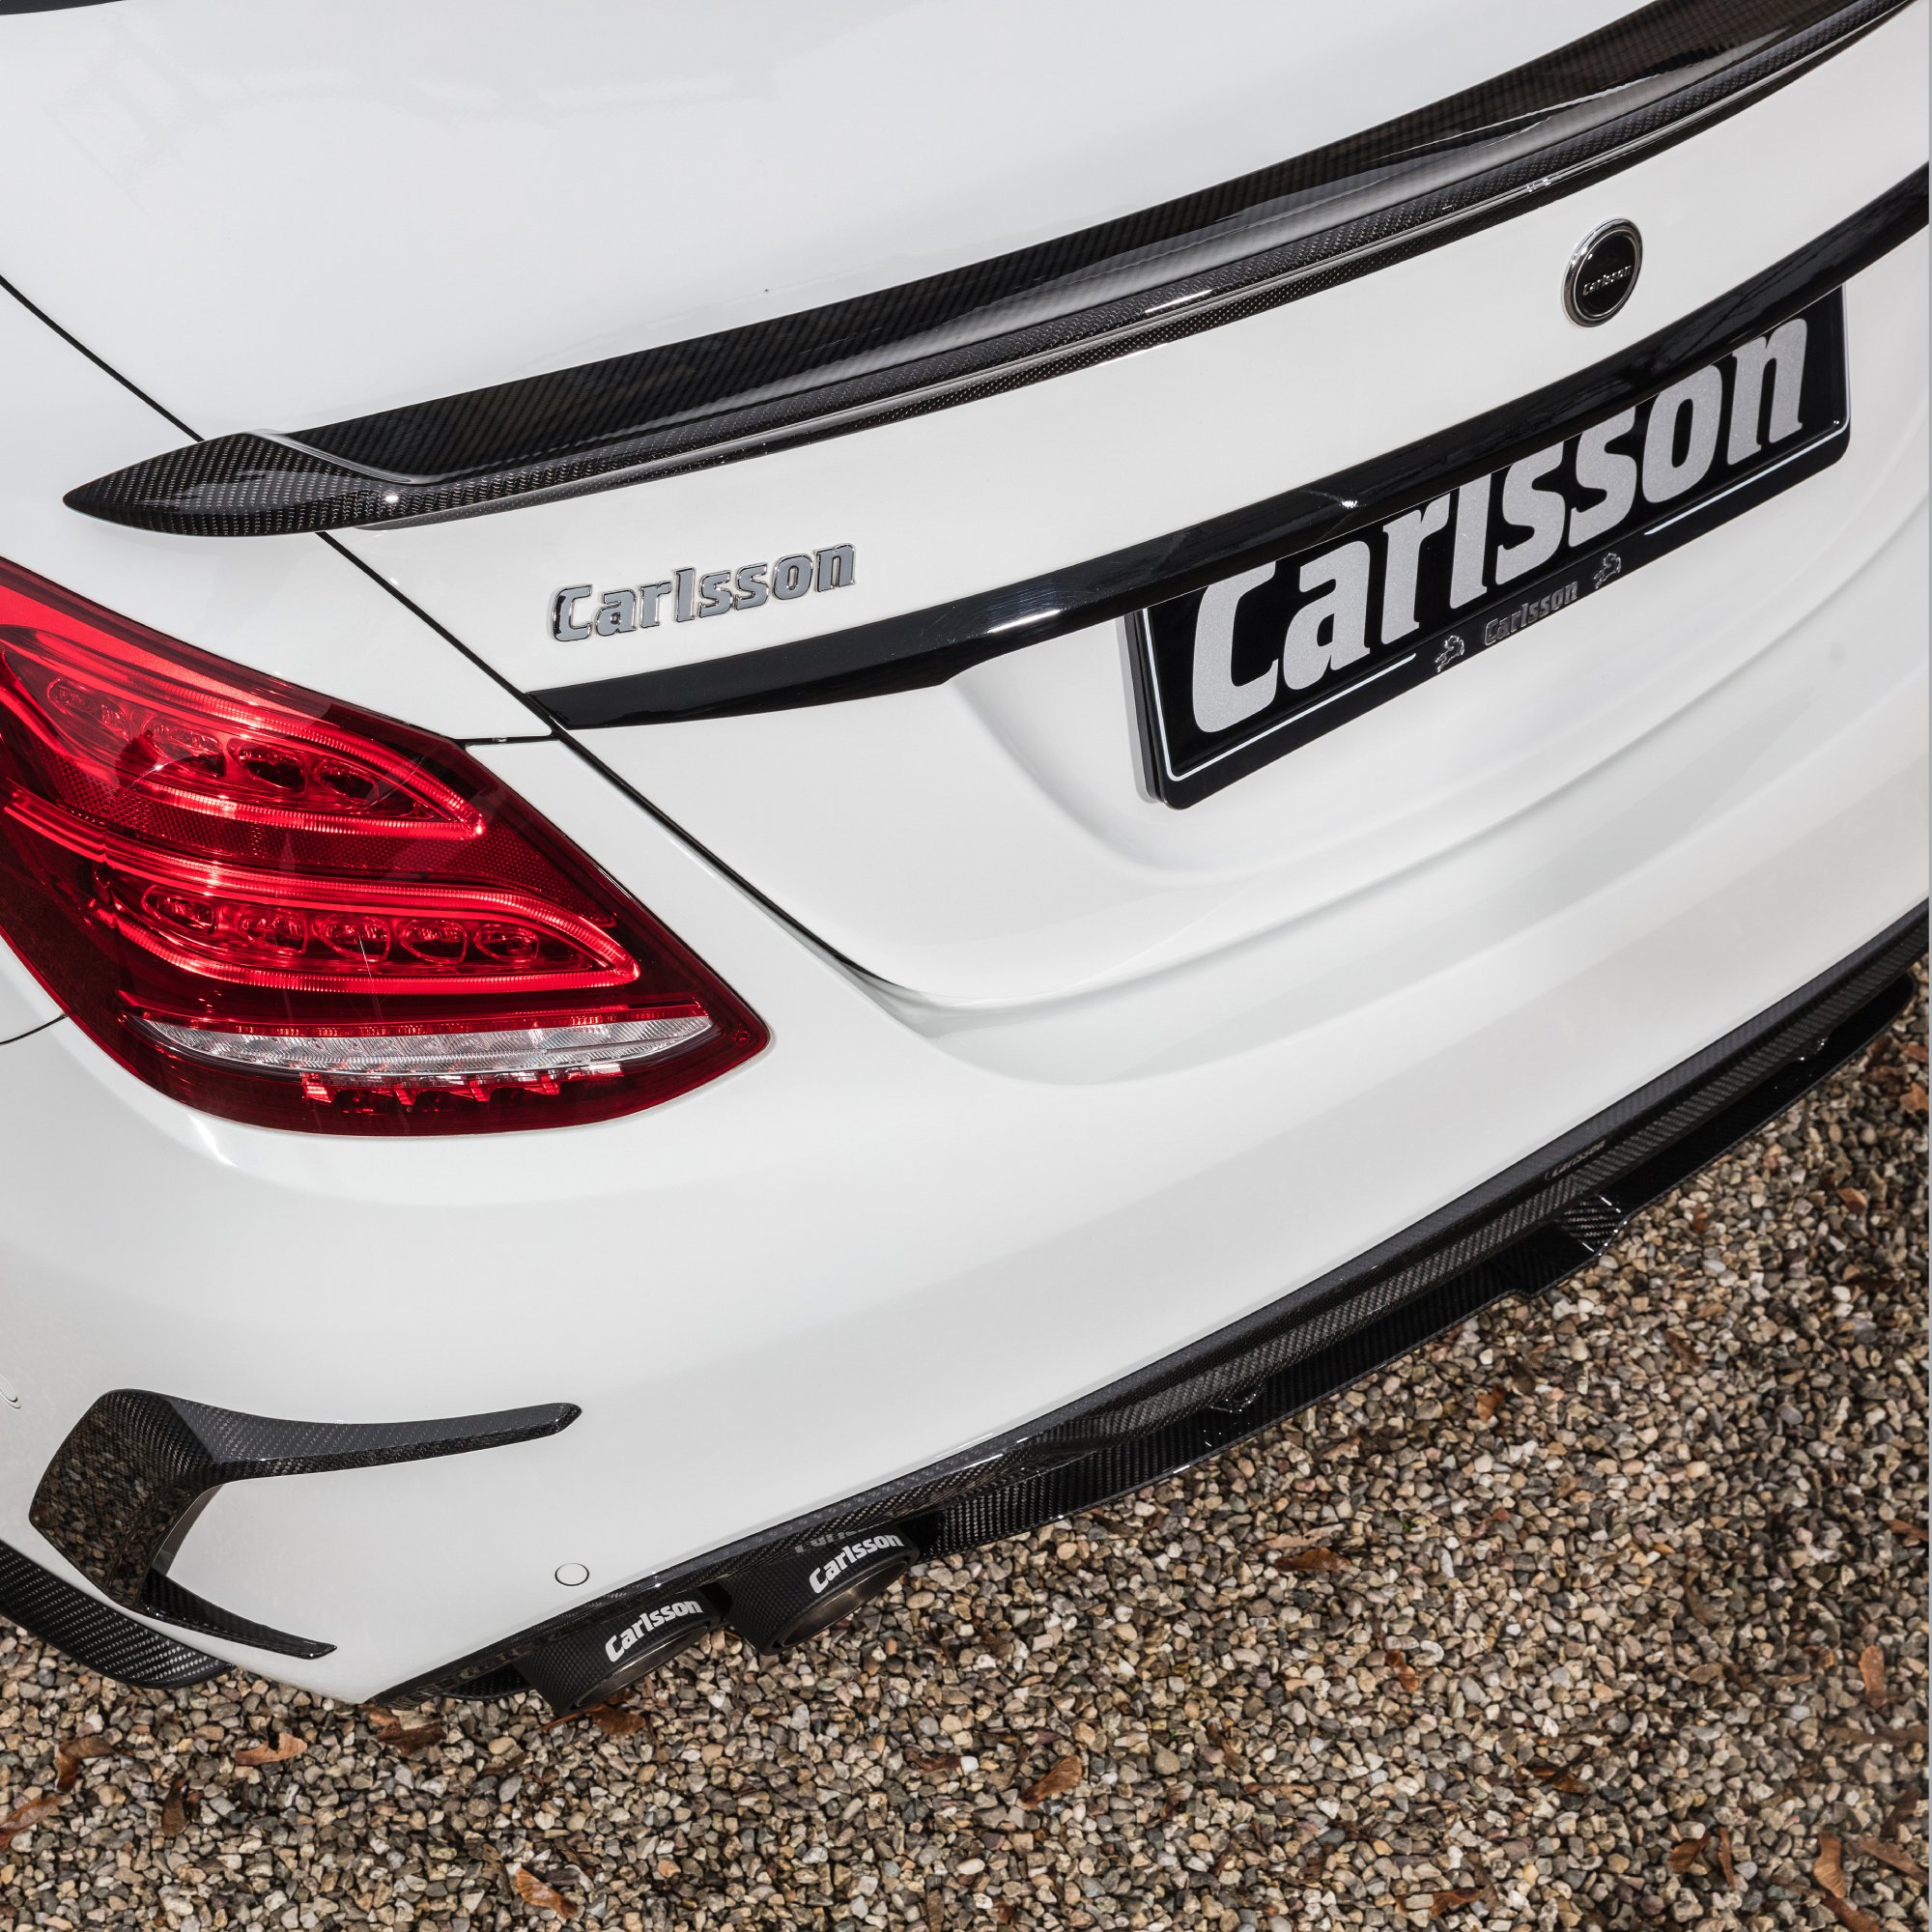 Check our price and buy Carlsson carbon fiber body kit set for Mercedes C-class  W205 63